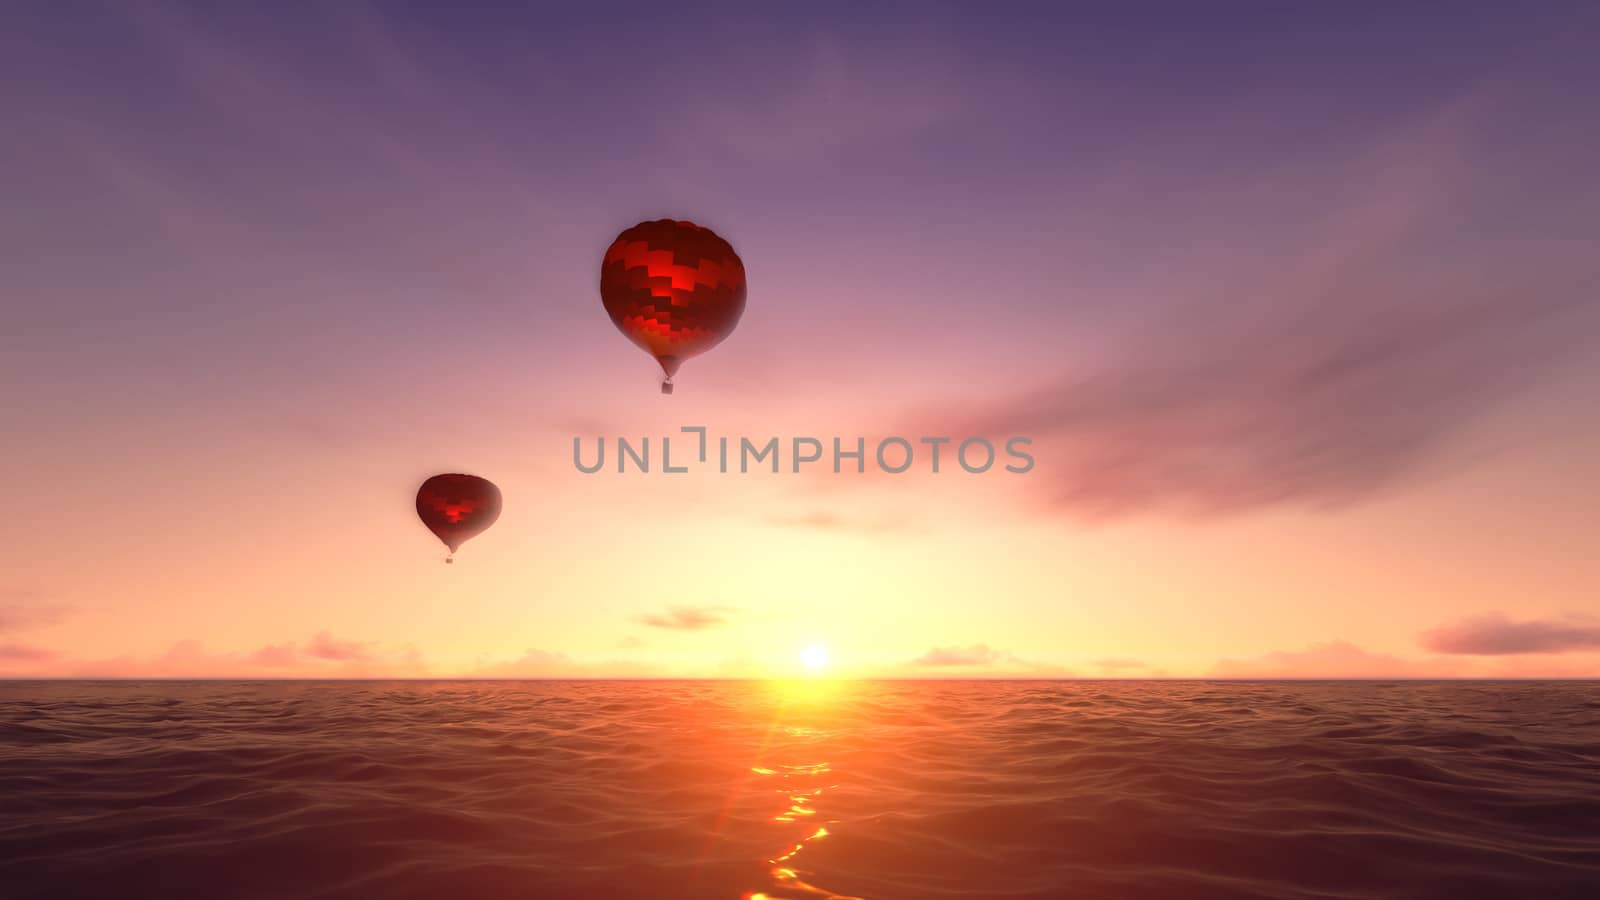 Balloon floating over the ocean by apichart